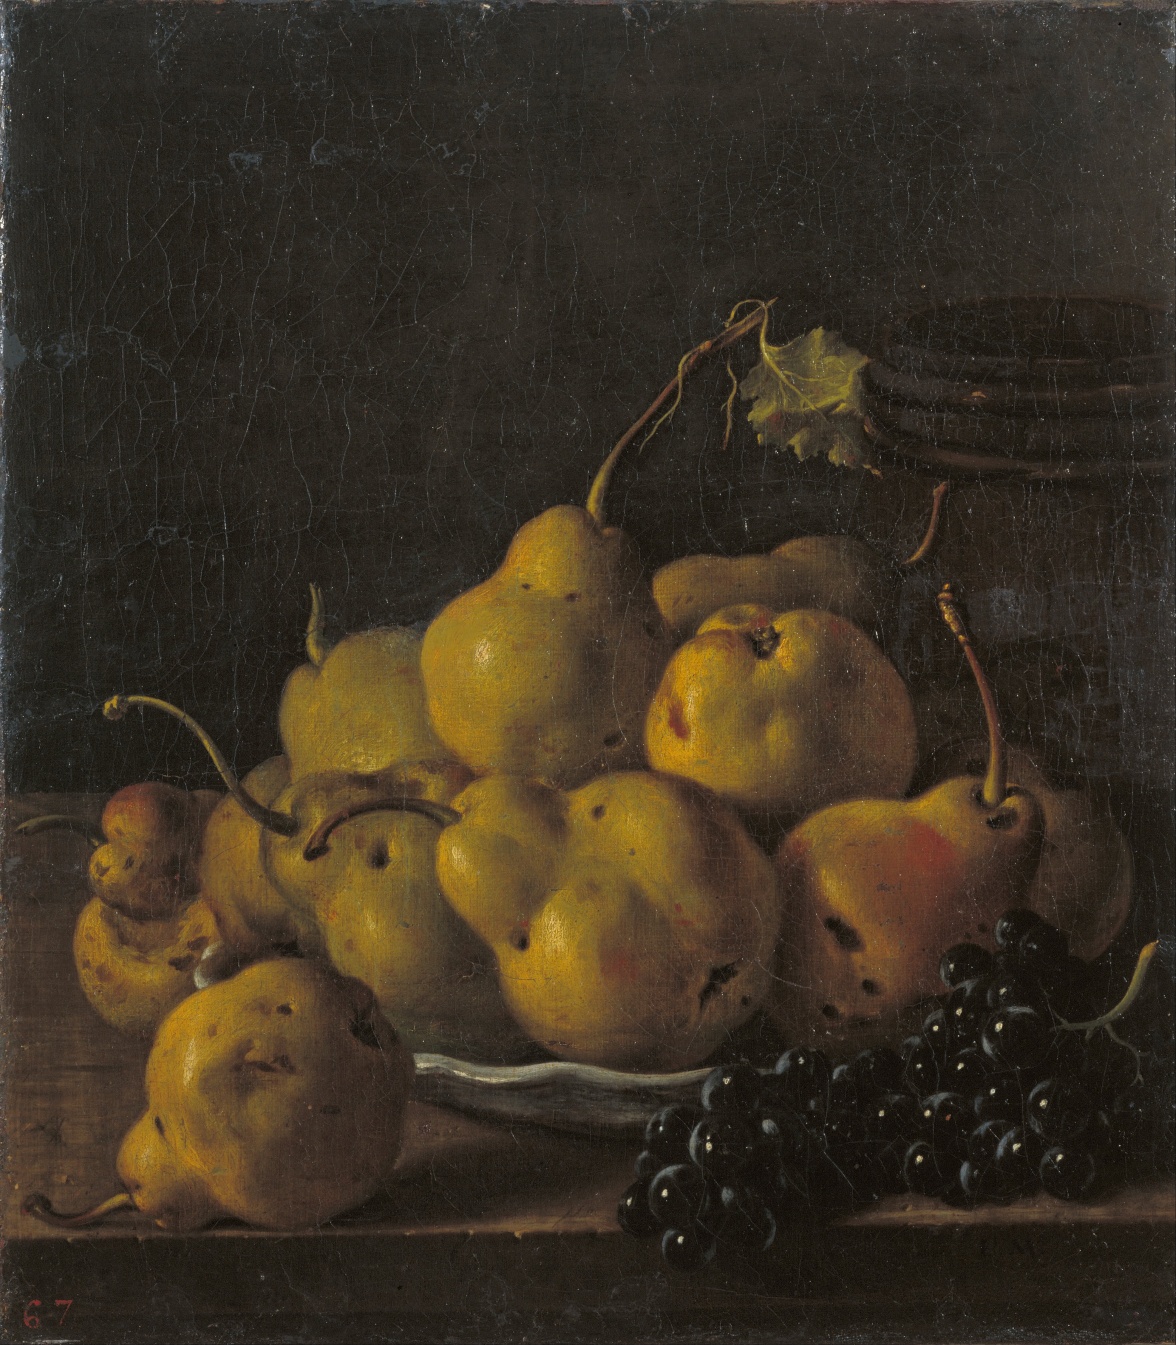 Luis Meléndez -"Still Life with Pears and Grapes"